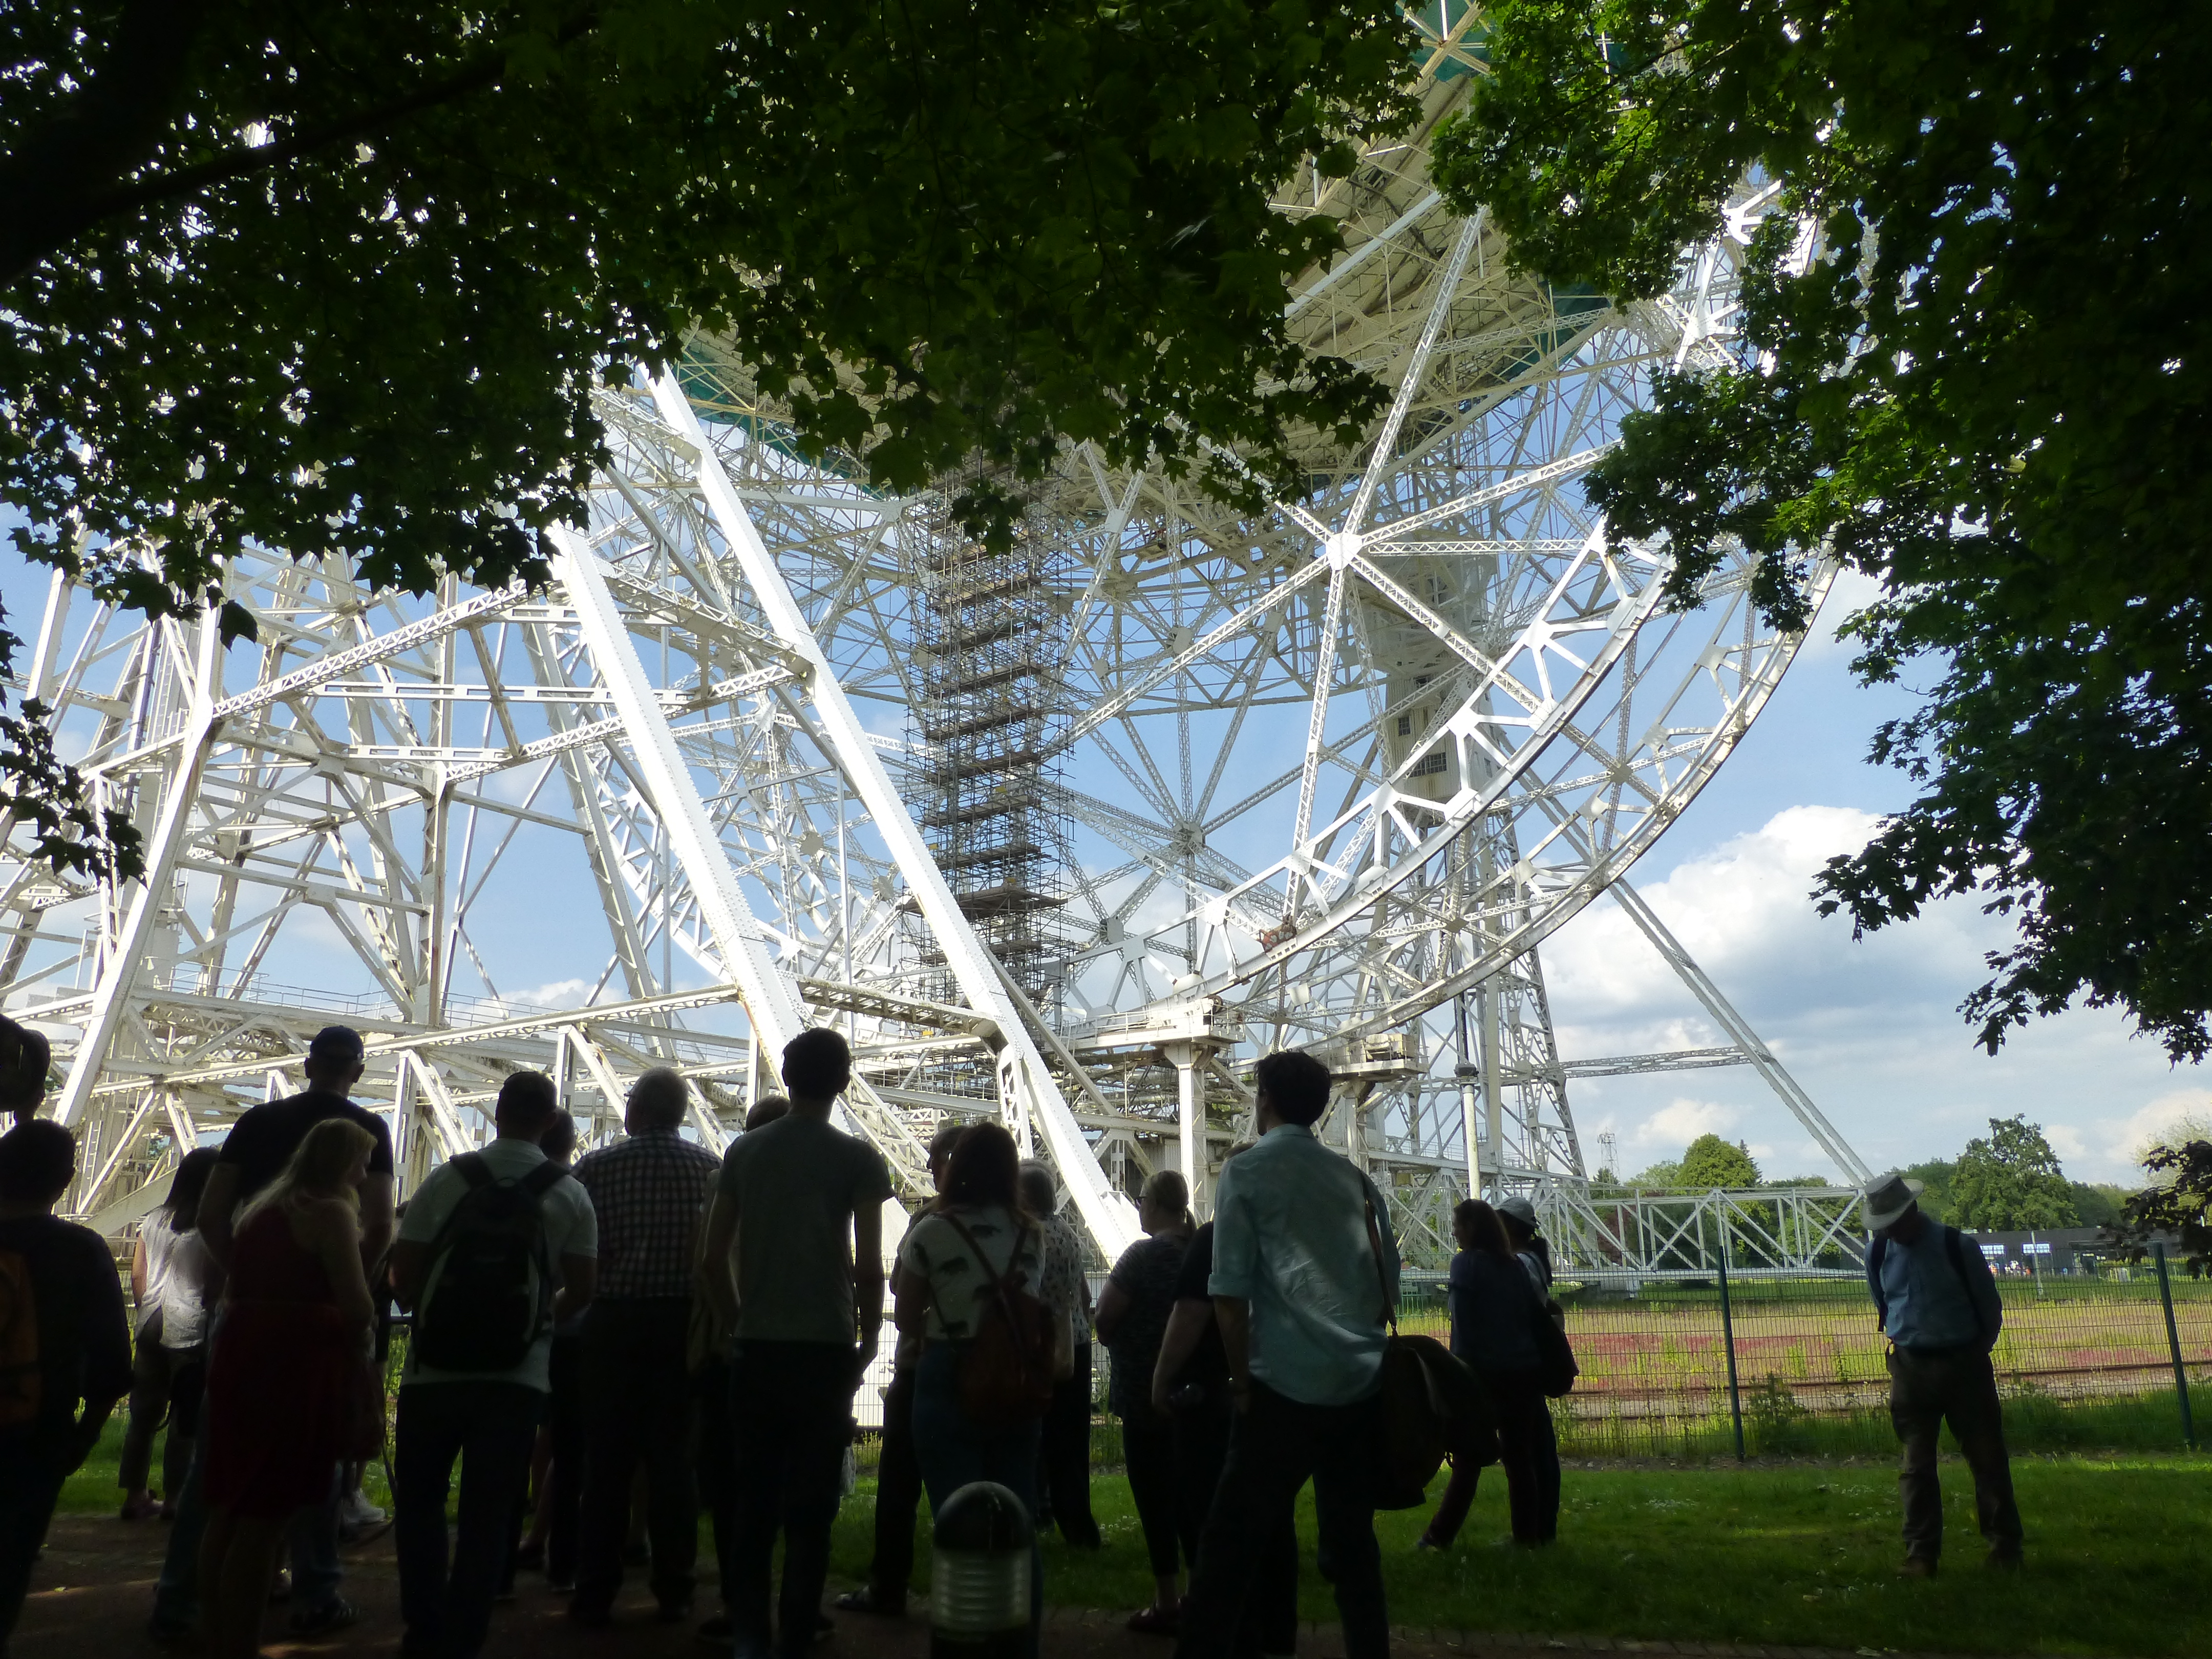 Story of the Lovell Telescope is explained